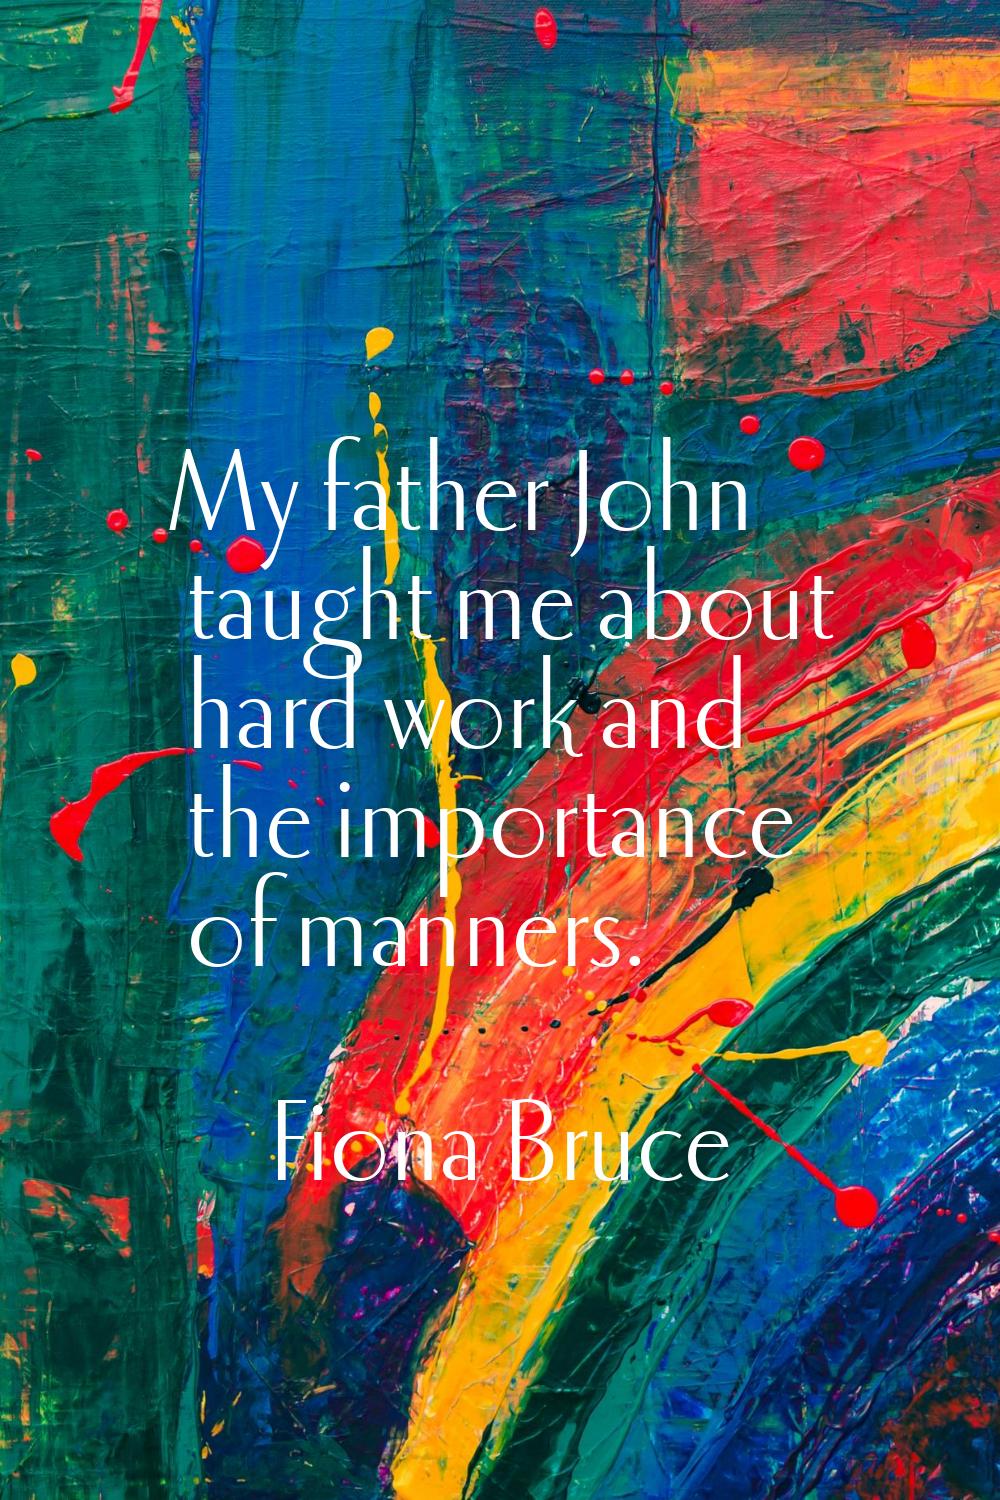 My father John taught me about hard work and the importance of manners.